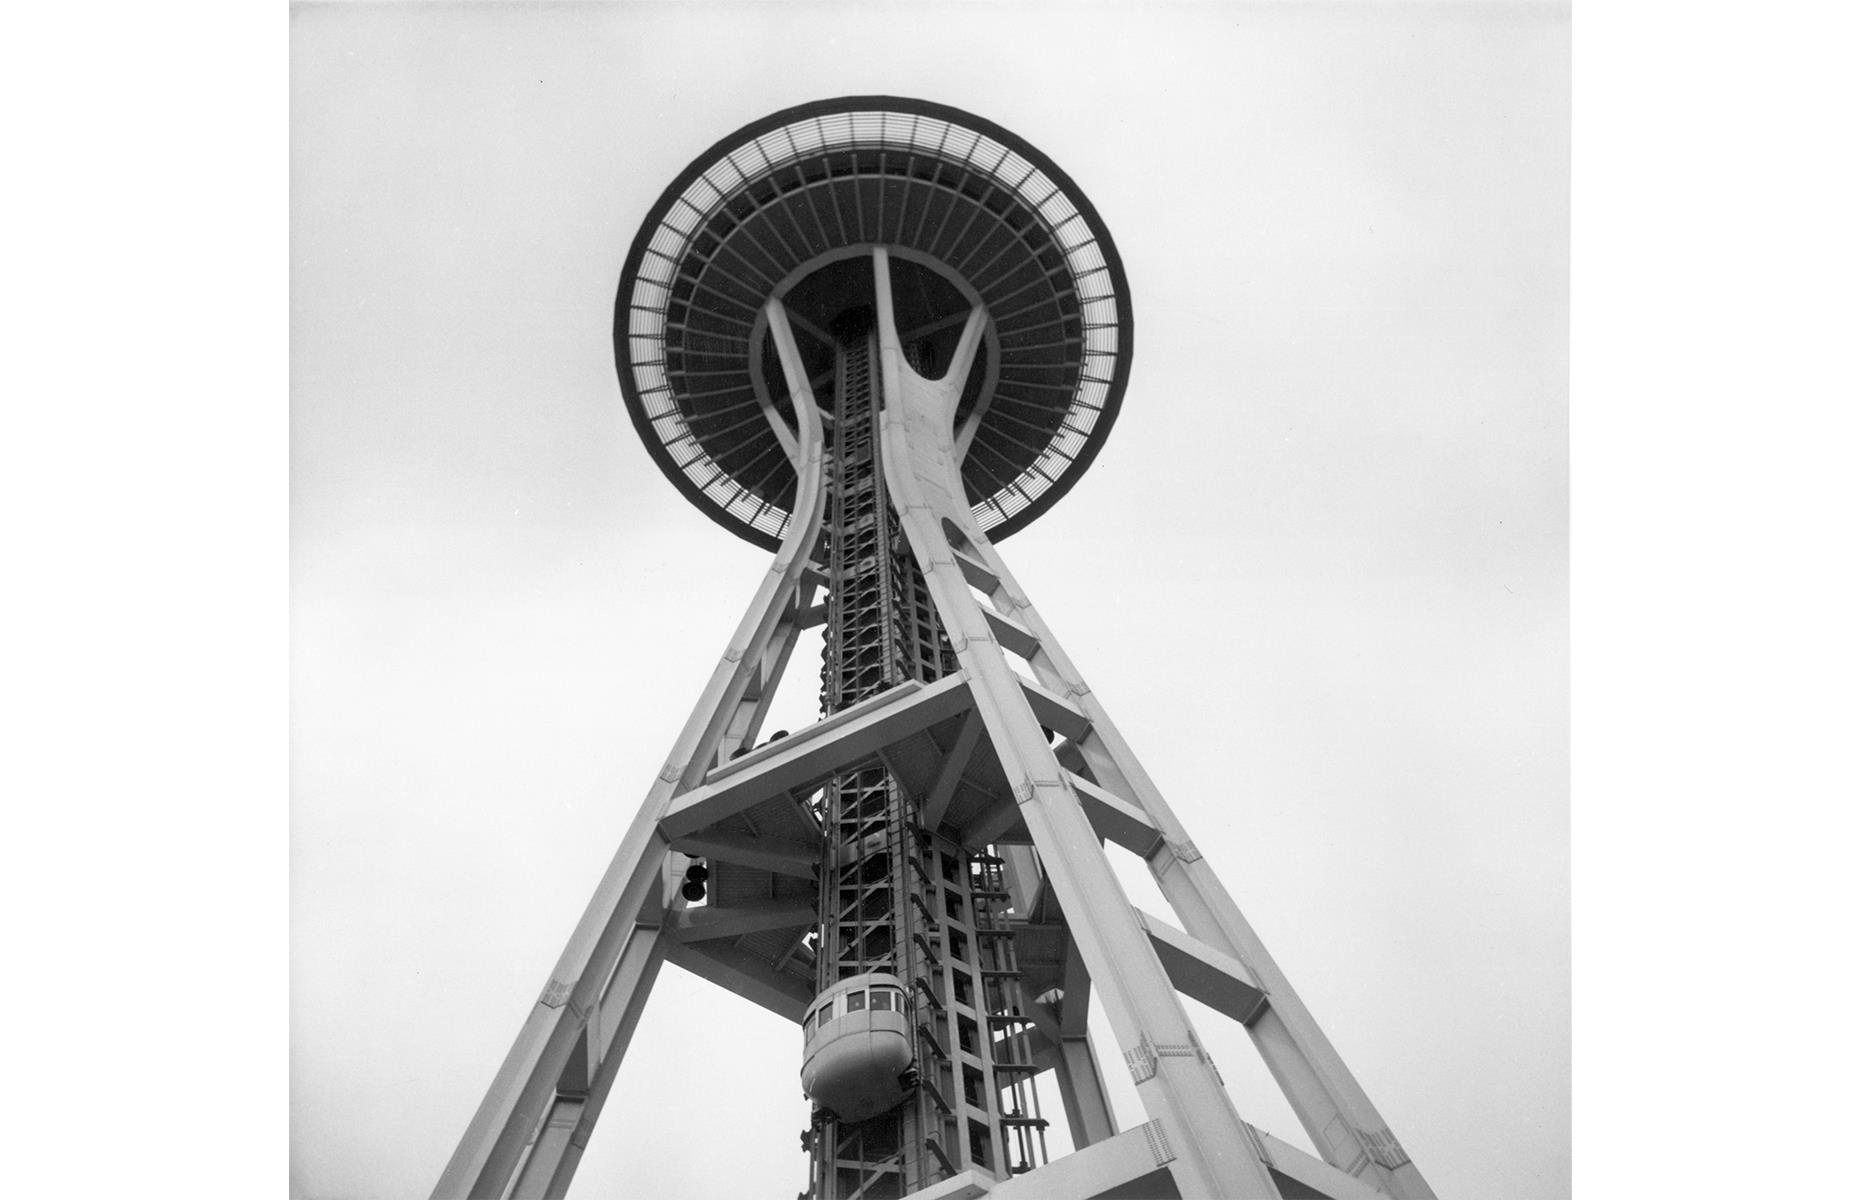 Seattle’s futuristic landmark, the Space Needle, officially opened to the public on 21 April 1962. It was built as part of the Century 21 Exhibition, a space-age themed World Fair. During the event, more than 20,000 people used the elevator to reach its summit each day, drawing more than 2.3 million visitors overall. Usually around 1.3 million people now visit the 600-foot-tall structure each year.